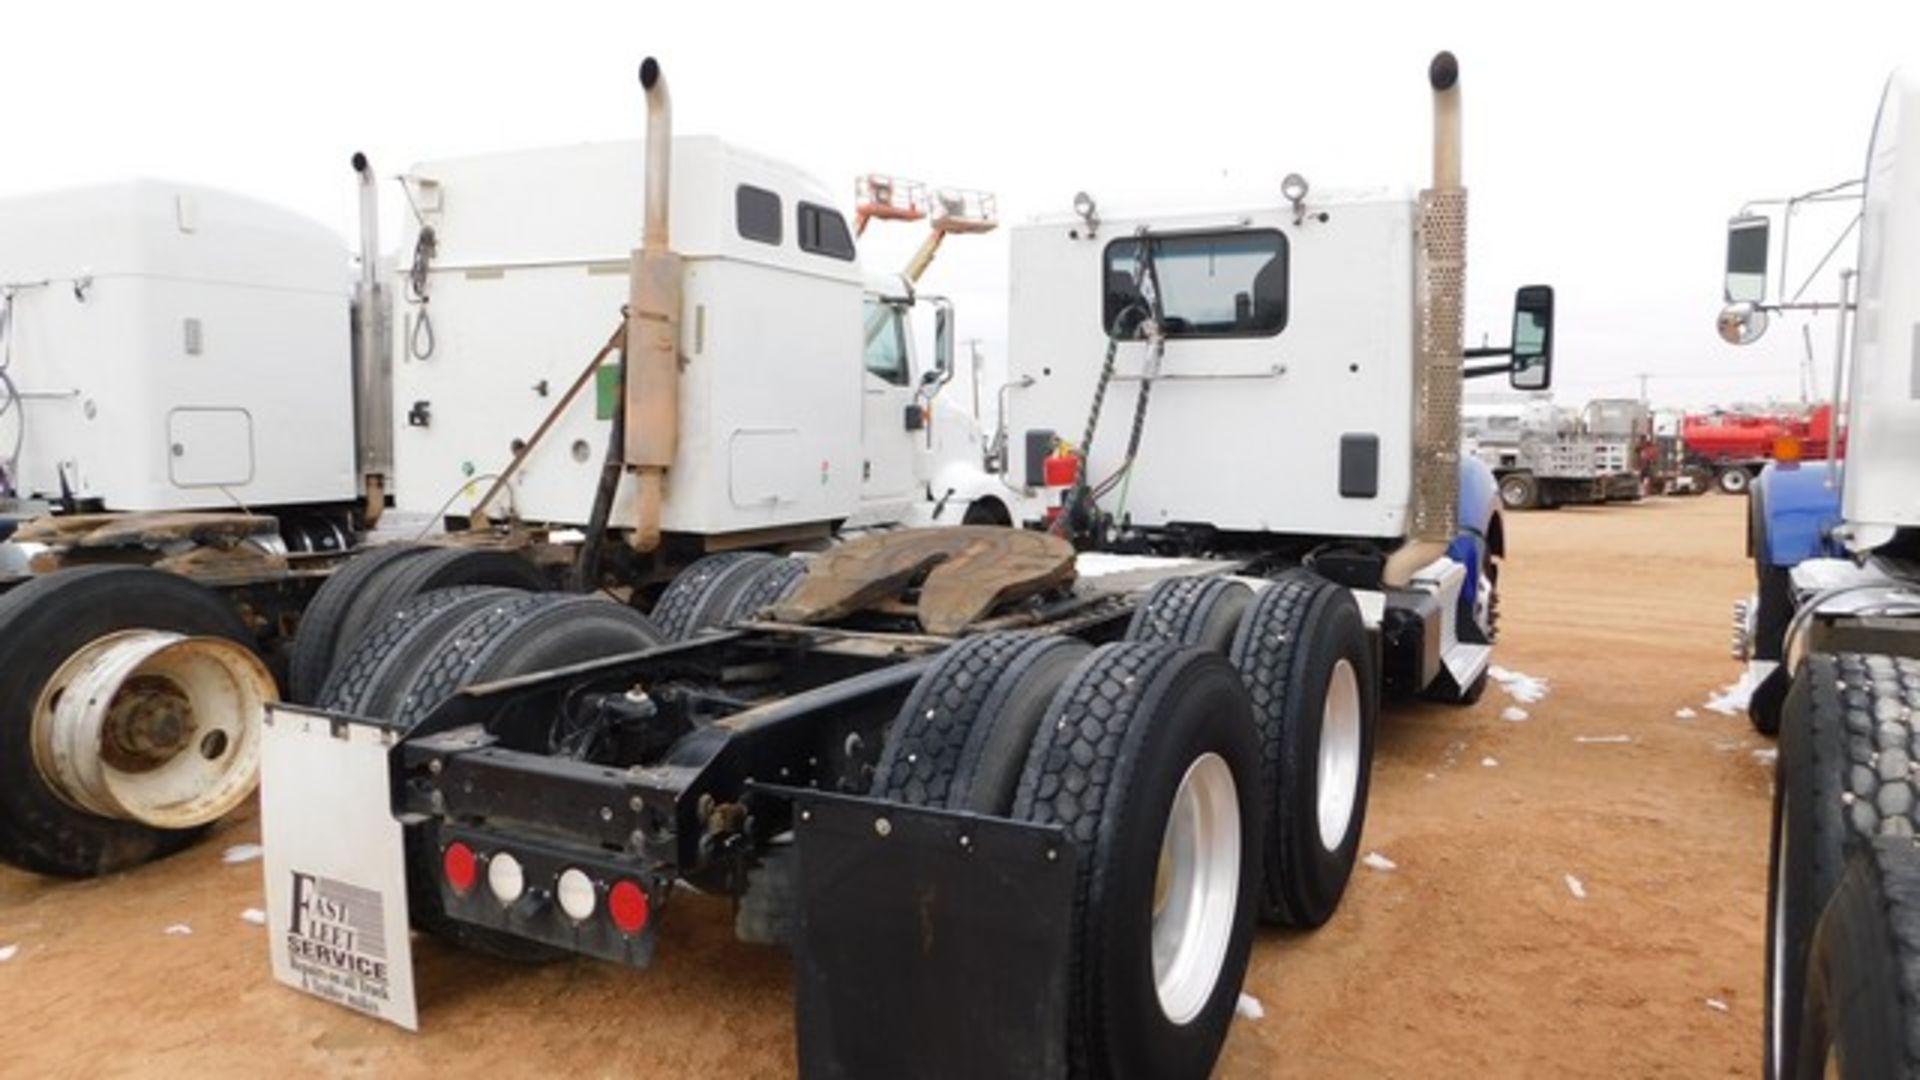 Located in YARD 1 - Midland, TX (6293) (X) 2015 KENWORTH T680 T/A DAY CAB HAUL T - Image 3 of 8